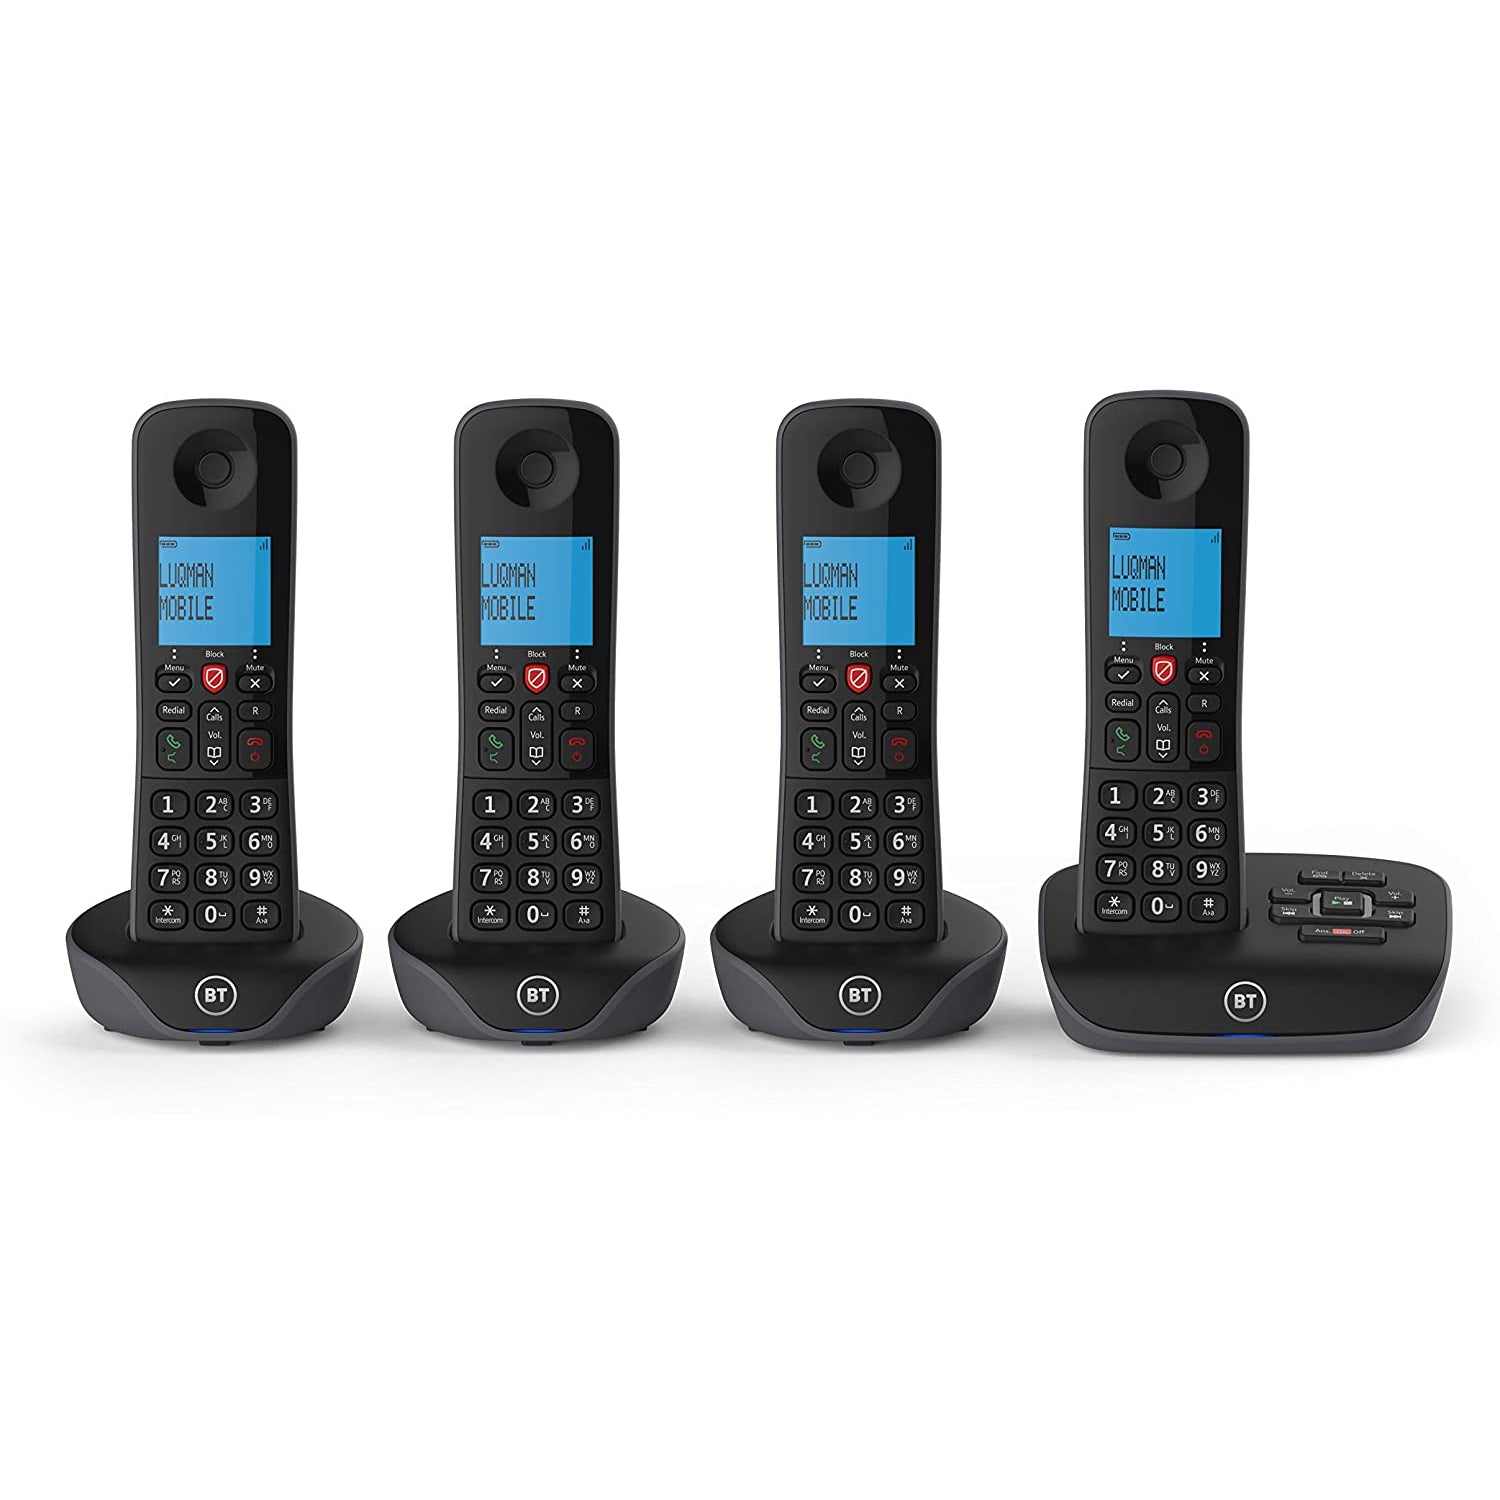 BT 90660 Essential Cordless Home Phone with Nuisance Call Blocking and Answering Machine, Quad Handset Pack, Black